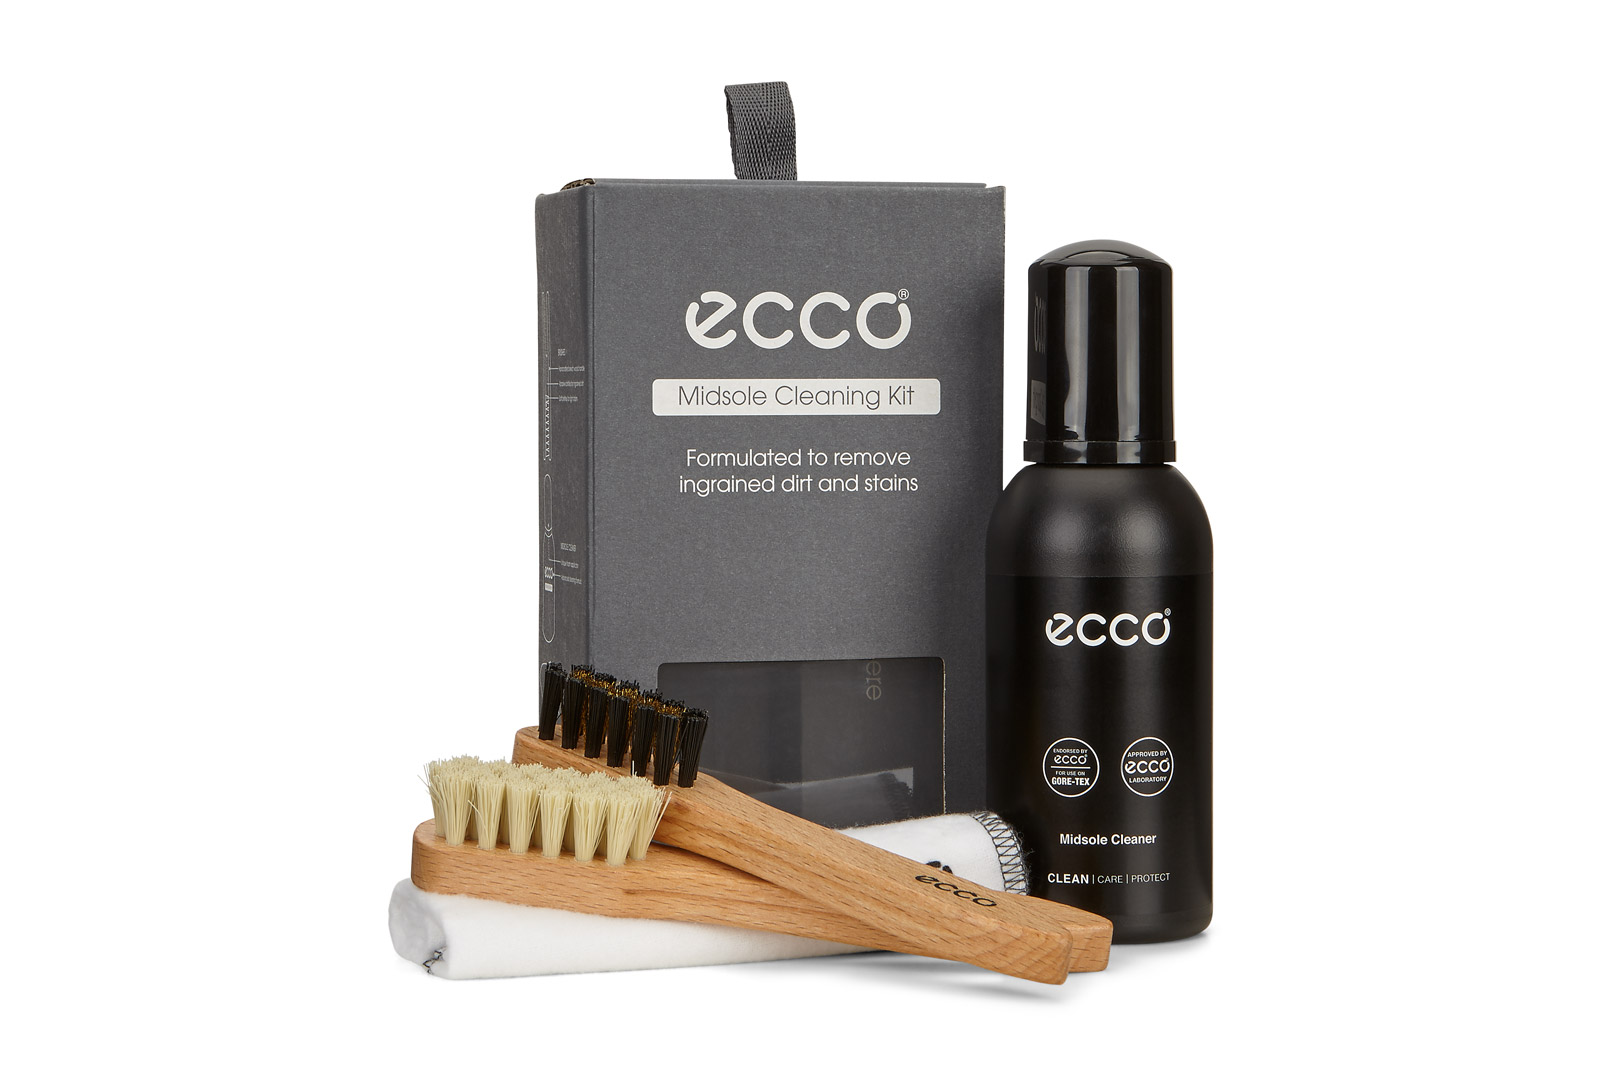 ECCO Golf shoe care, 903399400100 ECCO MIDSOLE CLEANING KIT